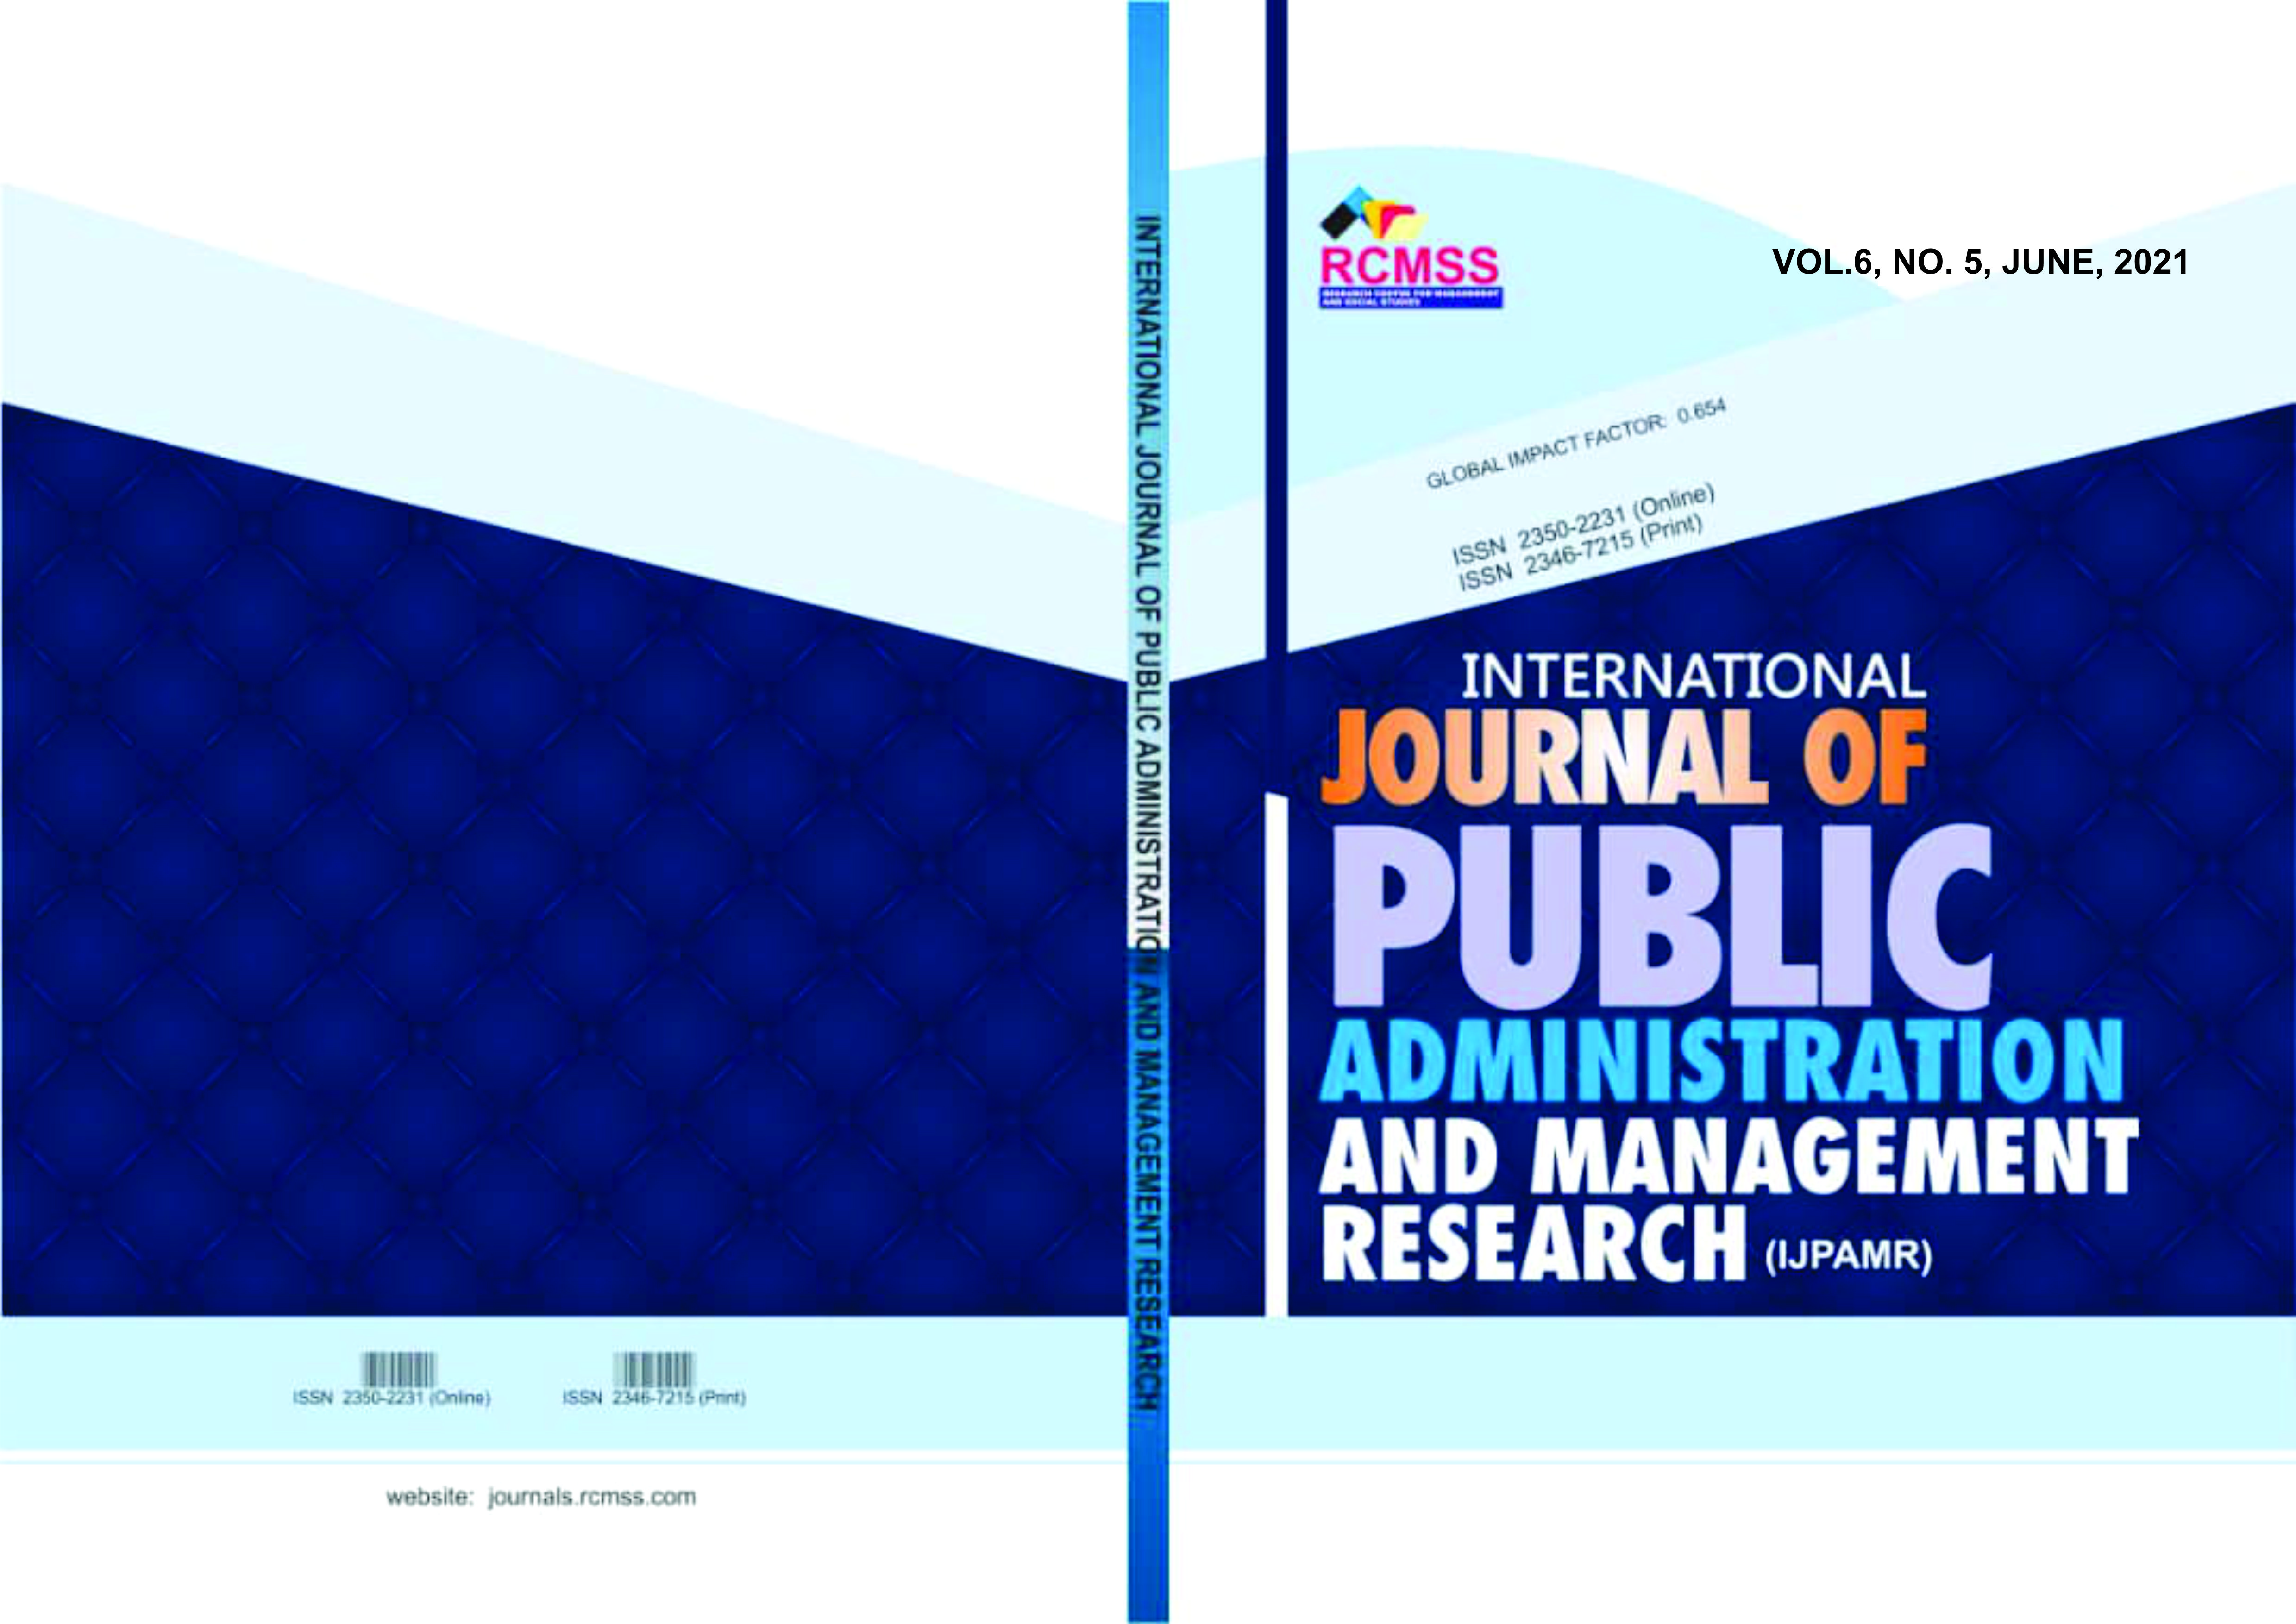 					View Vol. 6 No. 5 (2021): International Journal of Public Administration and Management Research (IJPAMR)
				